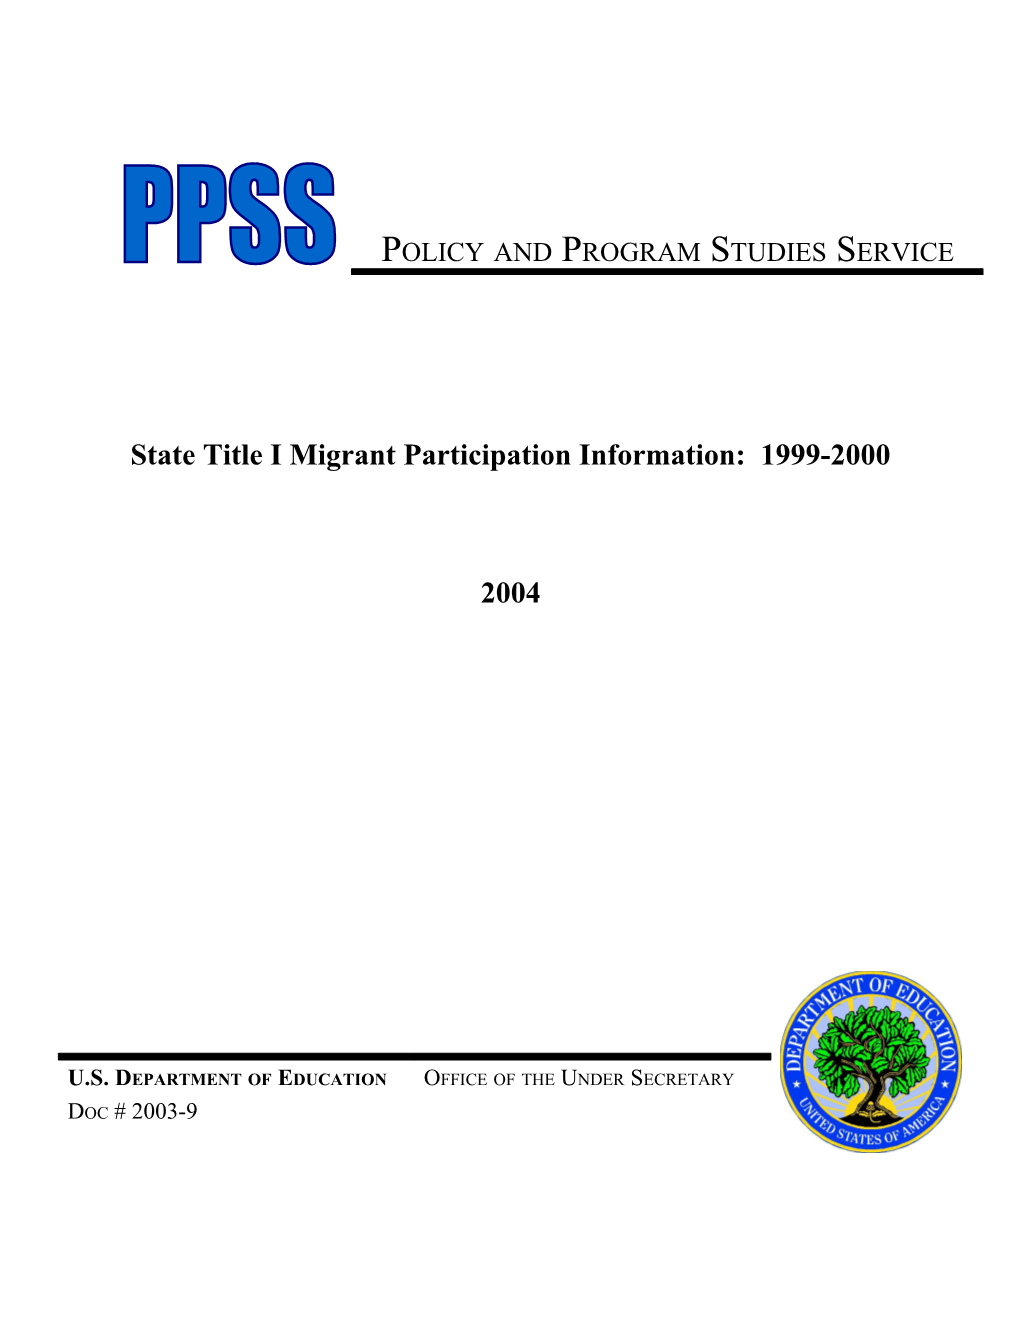 State Title I Migrant Participation Information: 1999-2000 (Msword)